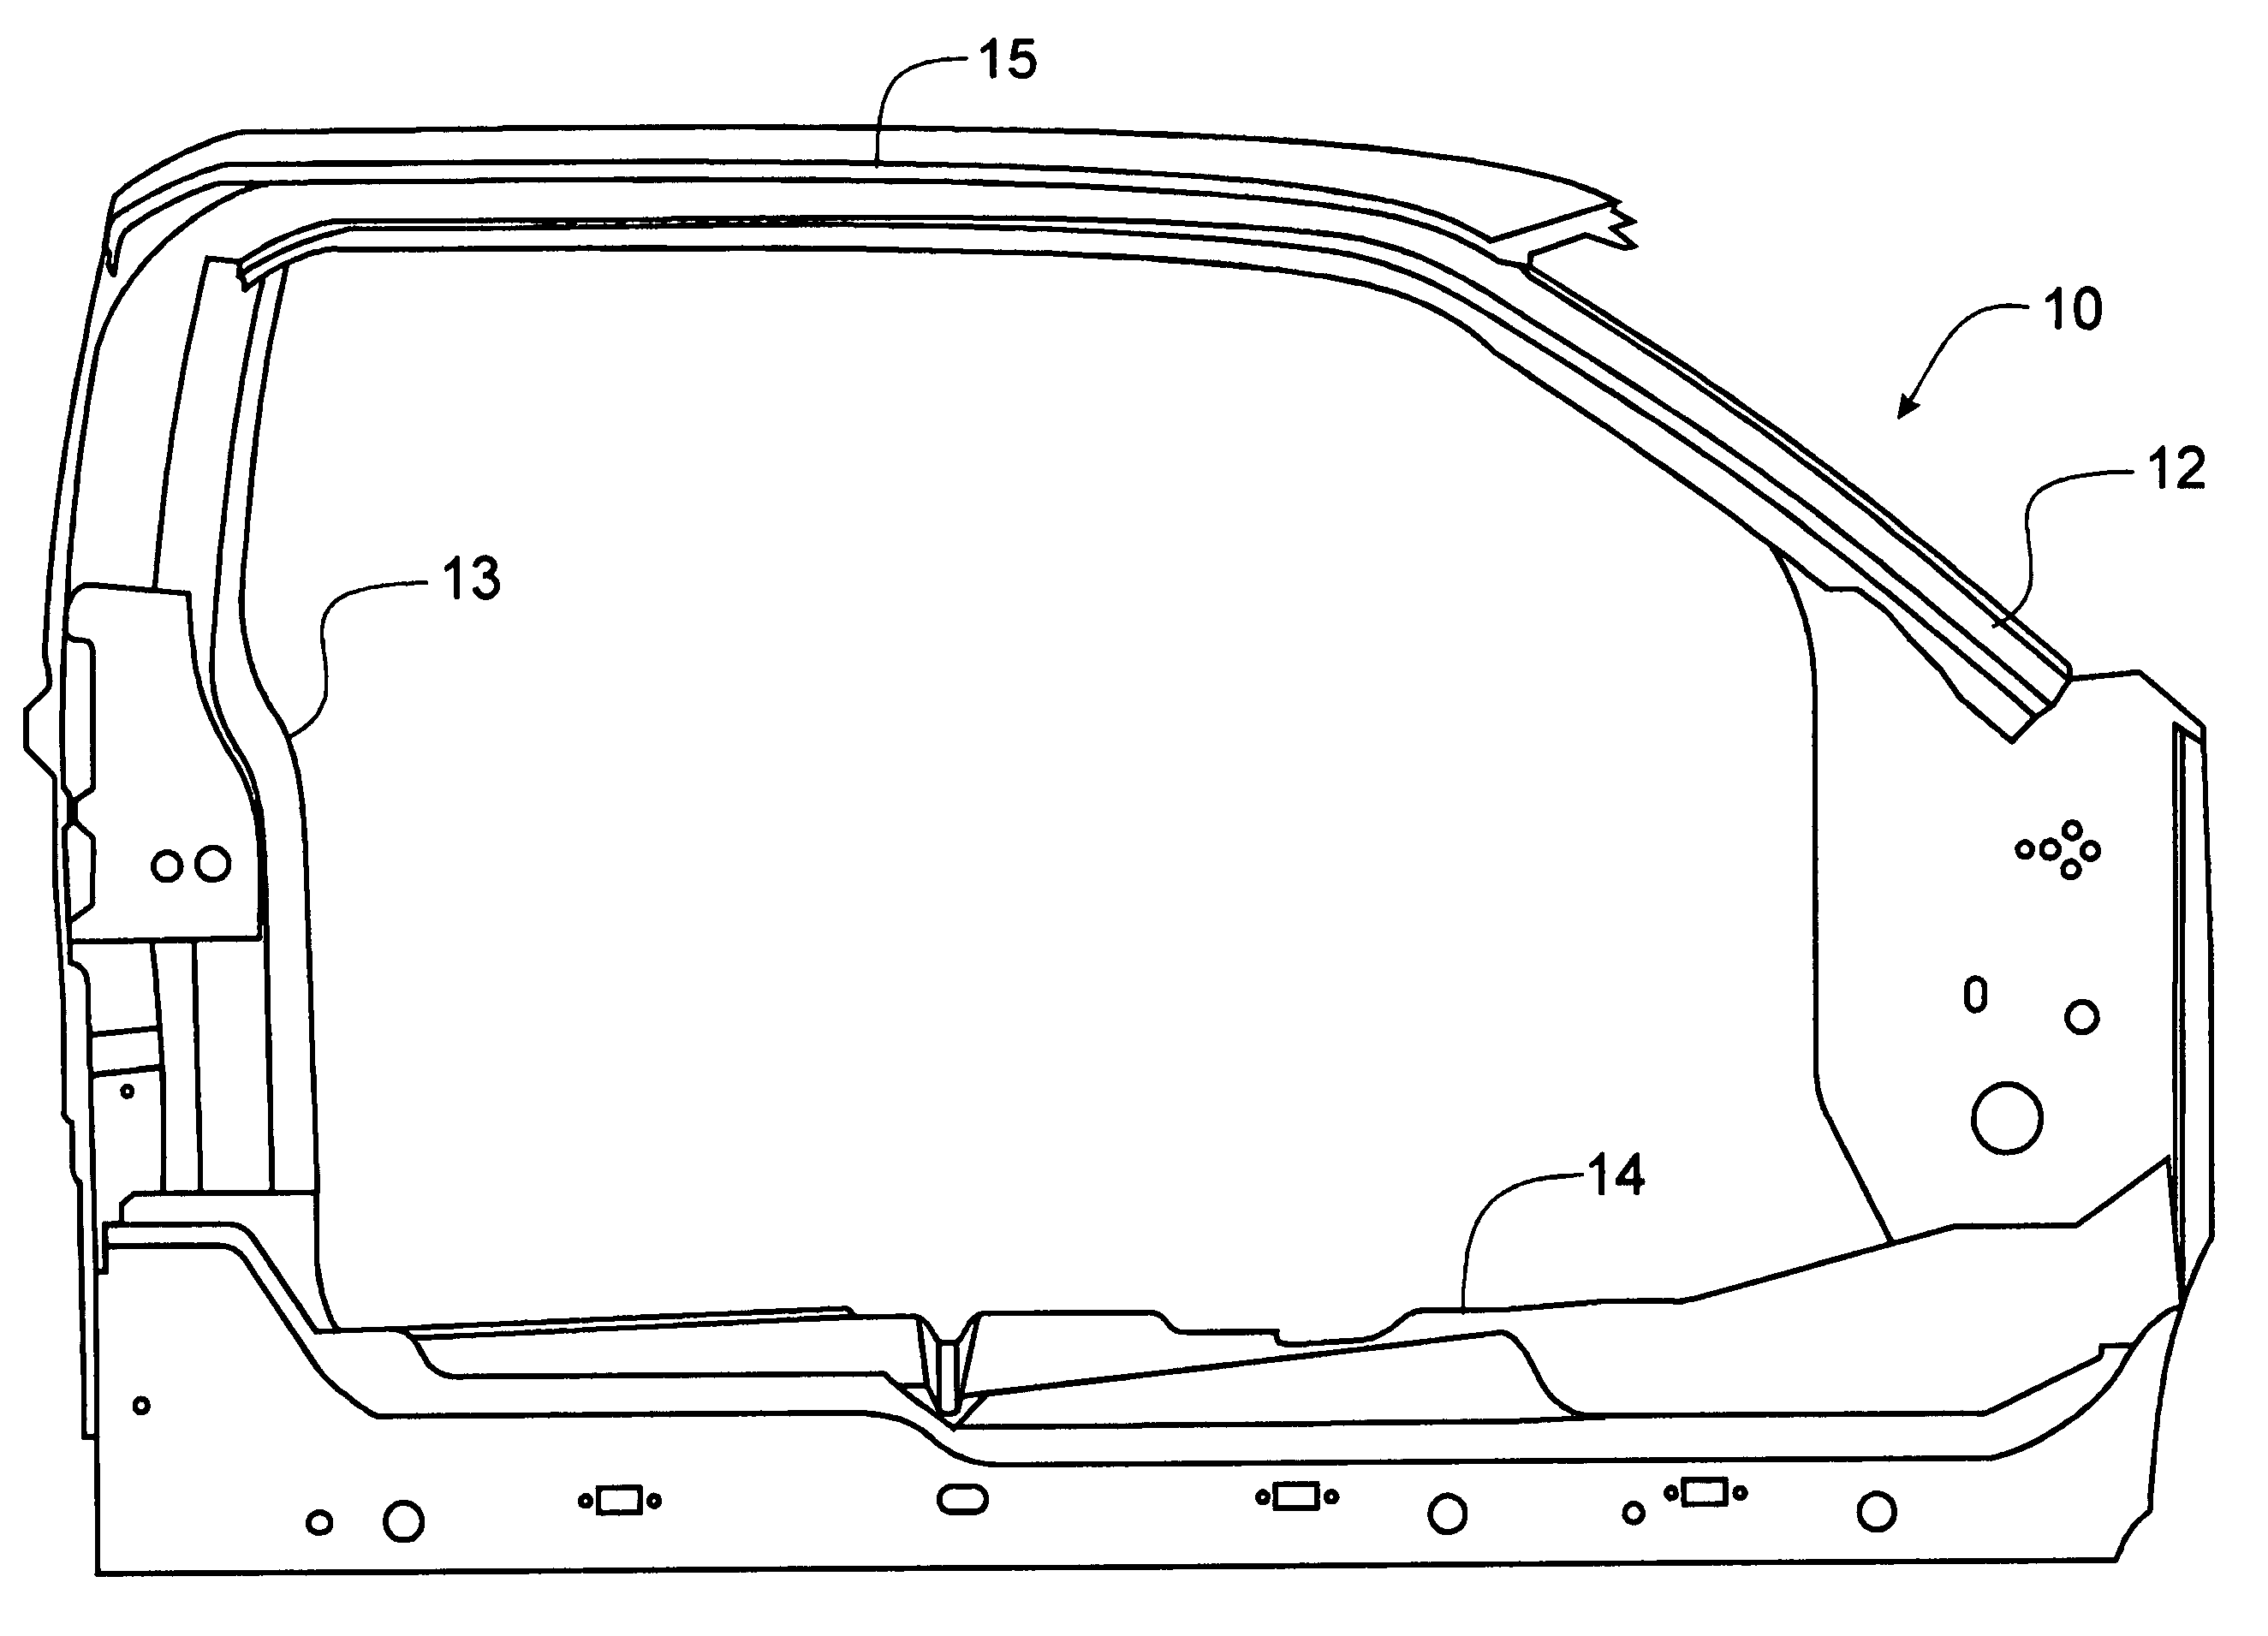 Multiple tube body side construction for automobiles